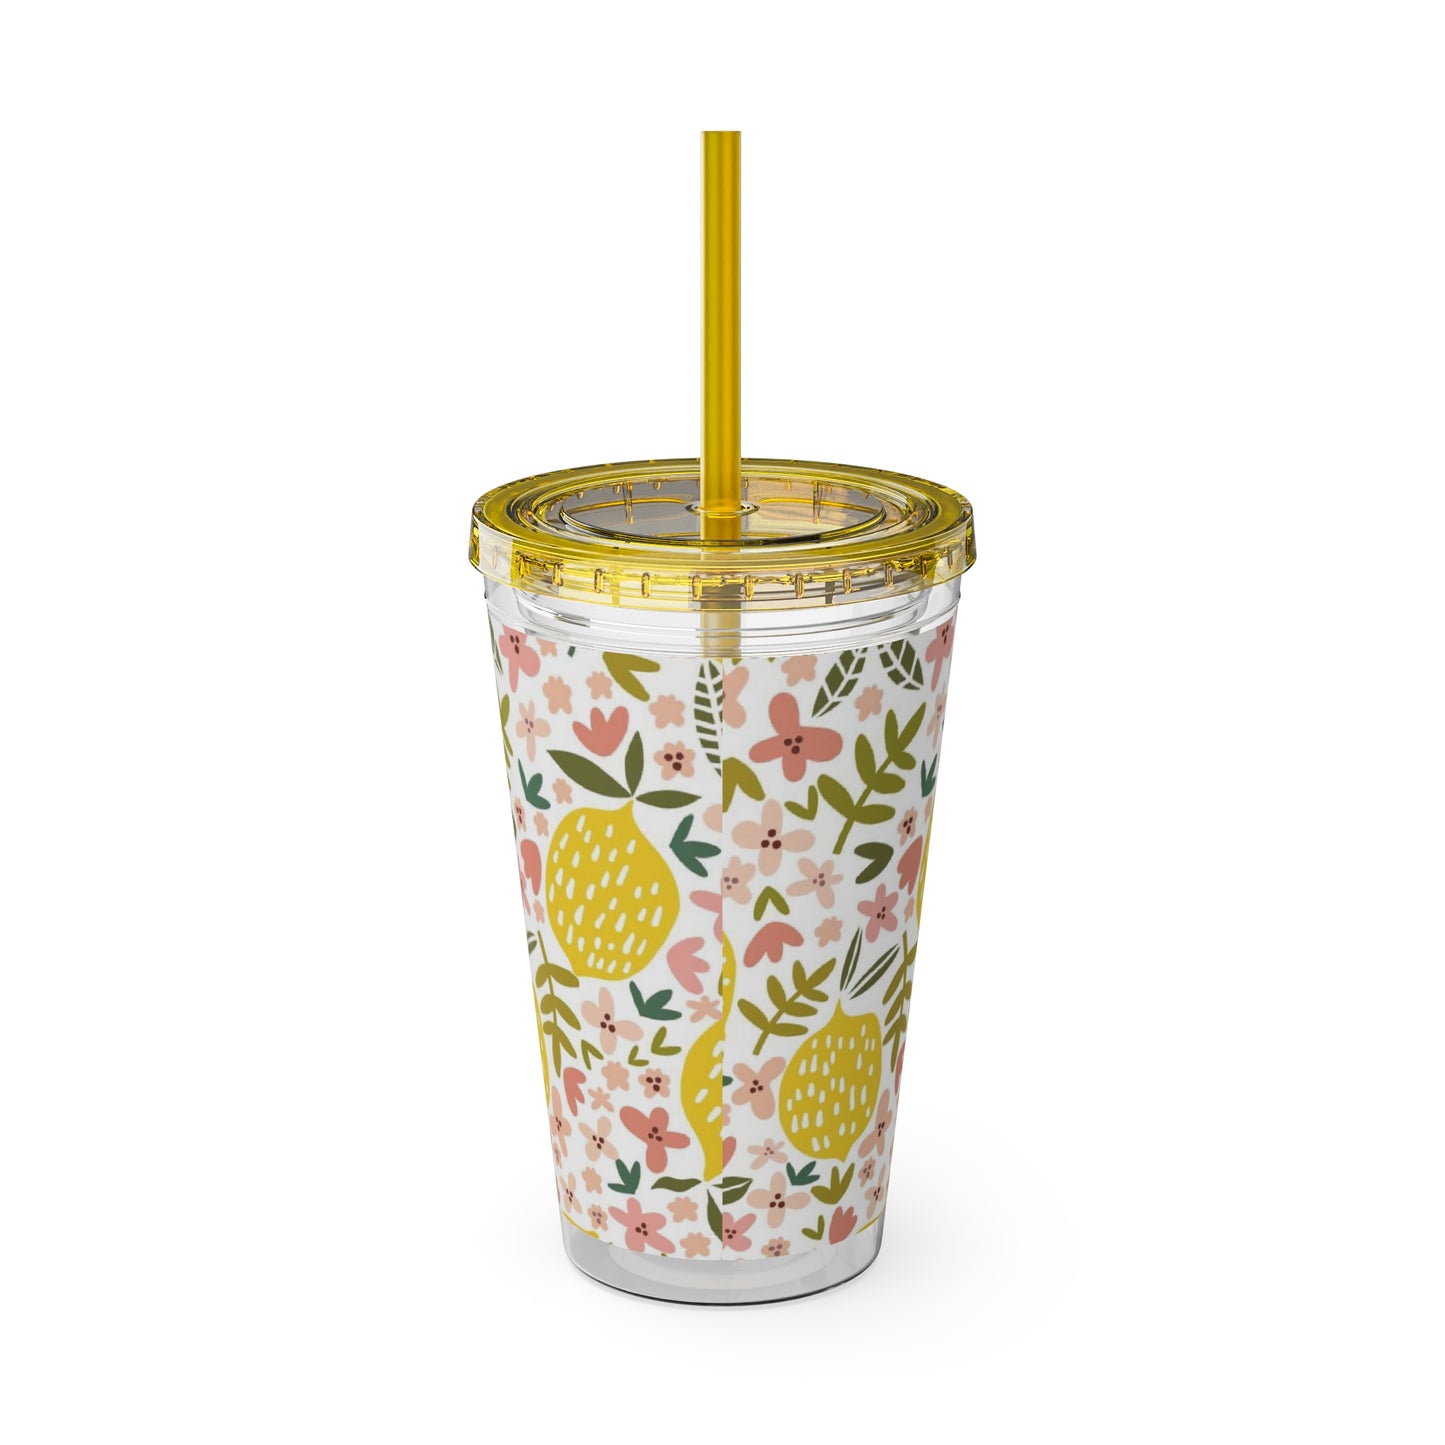 A Pink Lemons tumbler with a yellow straw and floral pattern.